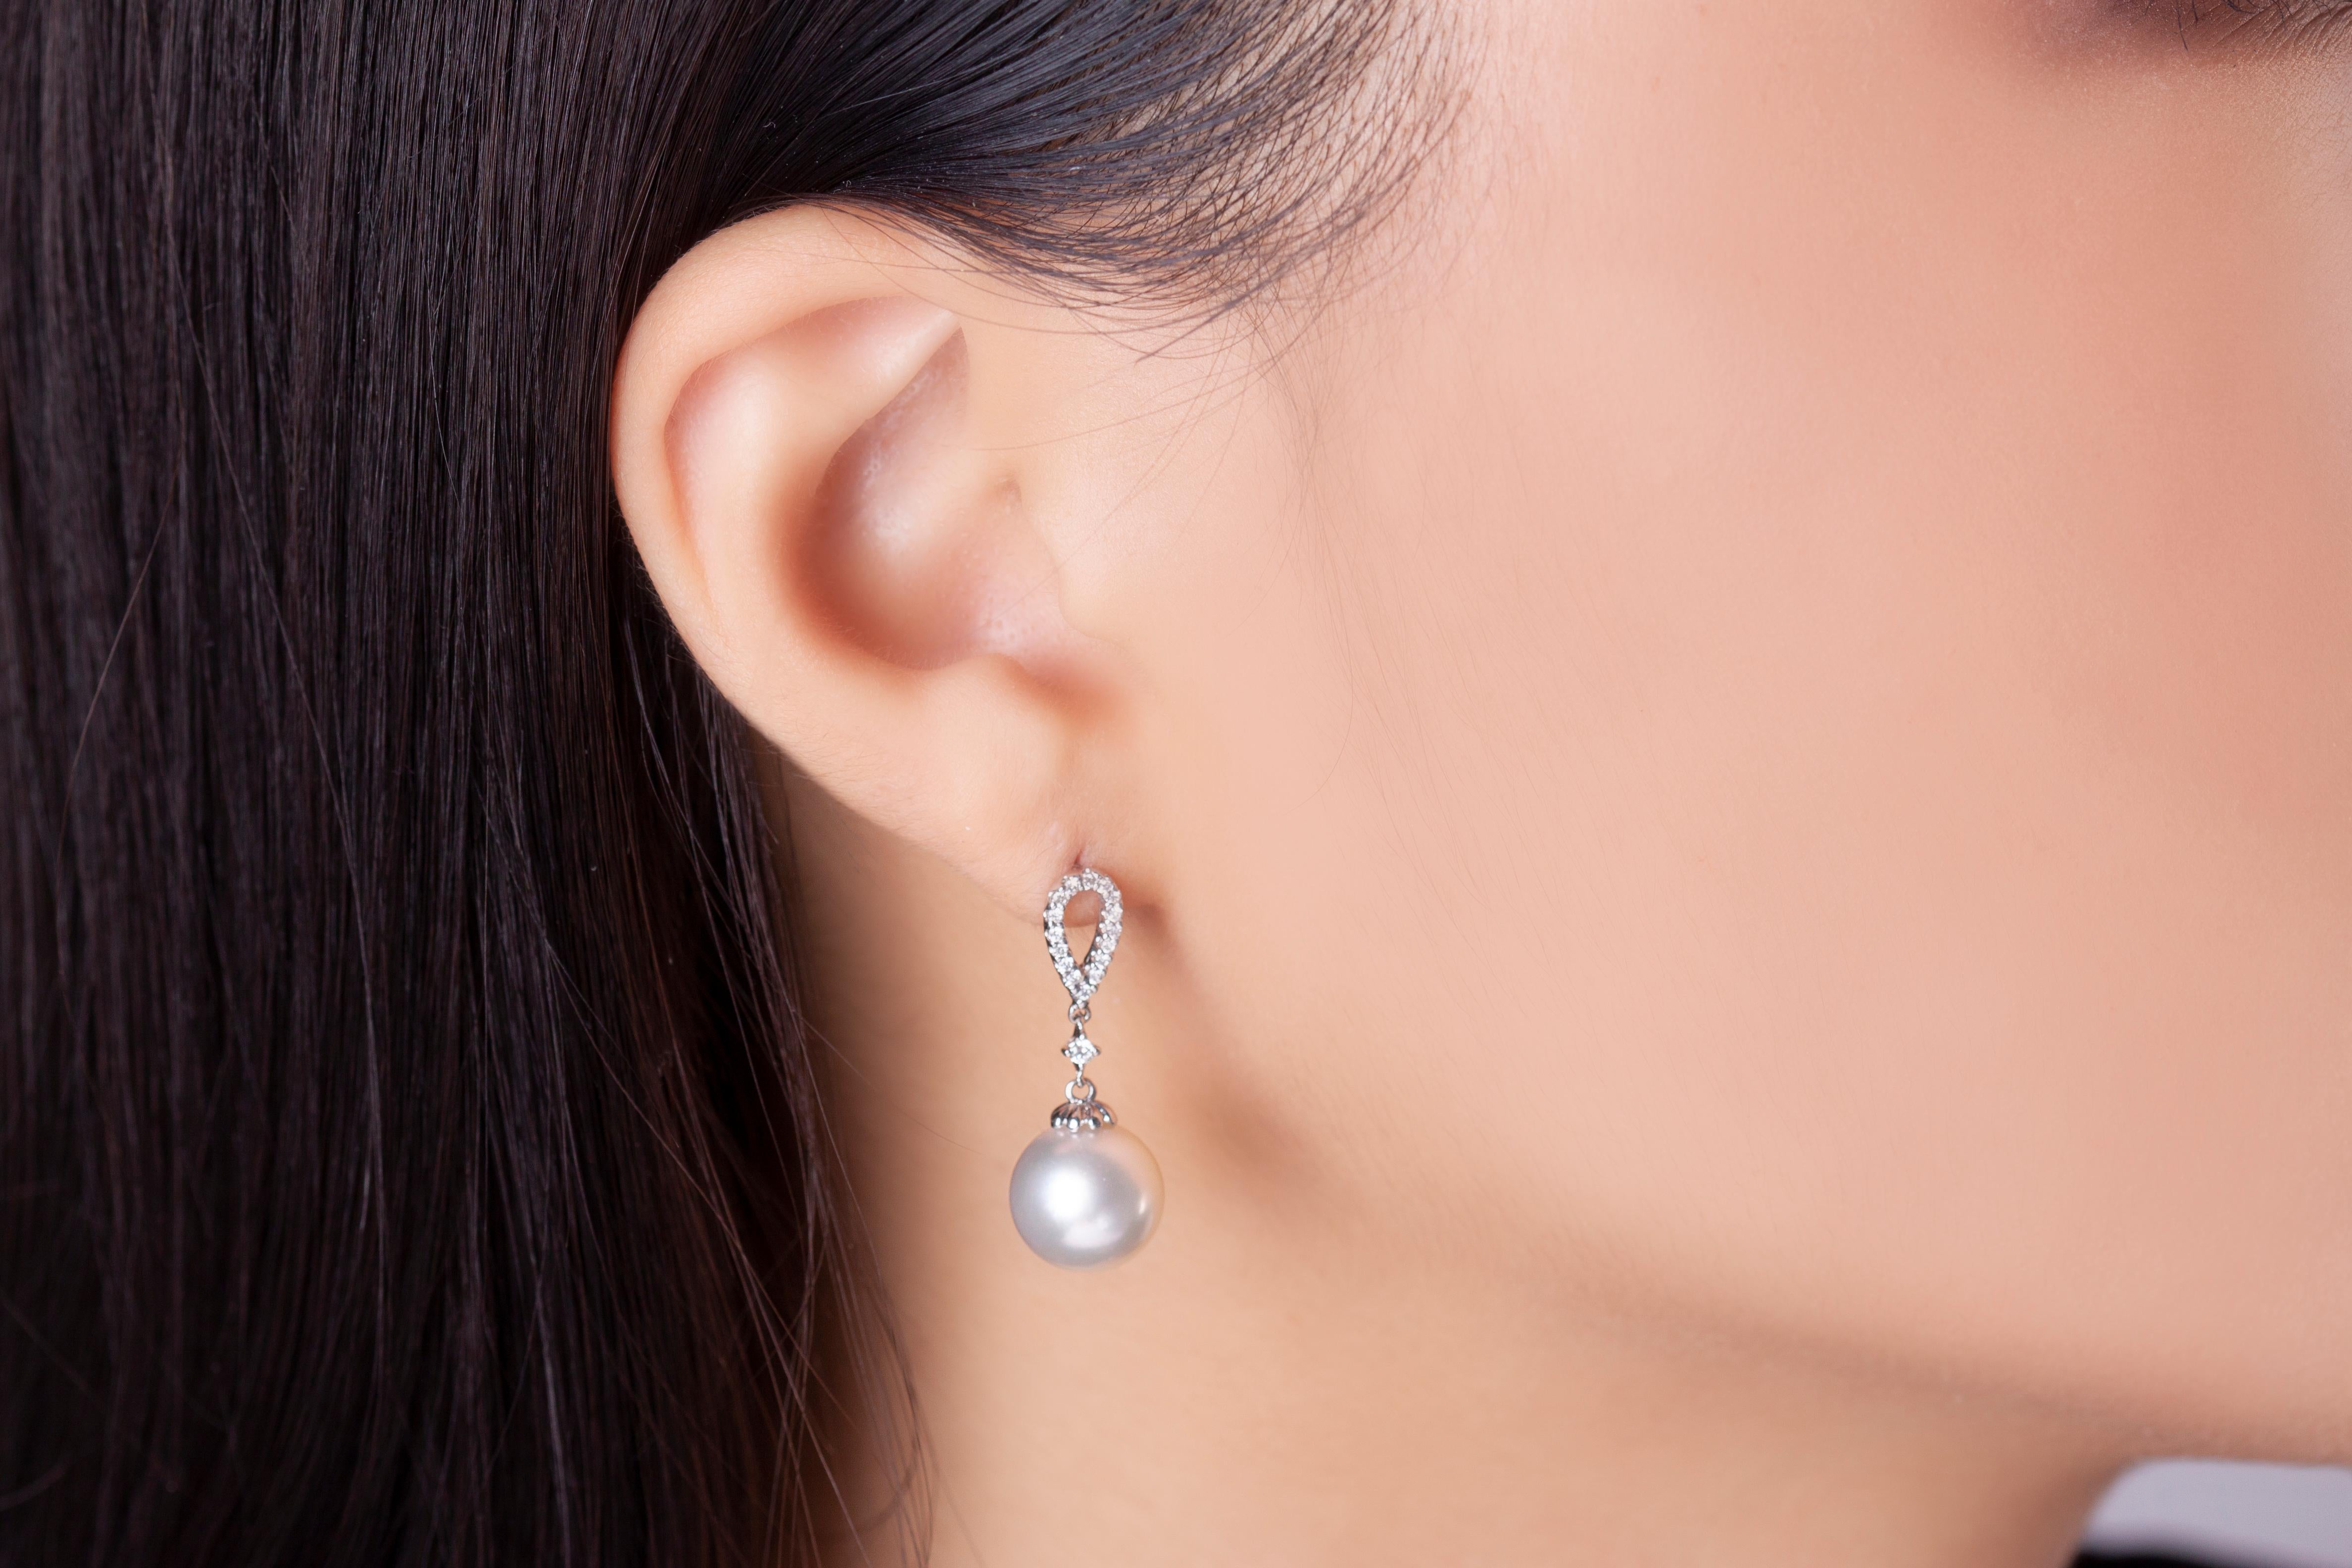 These elegant earrings by Yoko London feature lustrous 10-11mm South Sea pearls beneath a delicate arrangement of diamonds. The pearls featured at the centre of these earrings have been hand-selected by experts in our London atelier for their